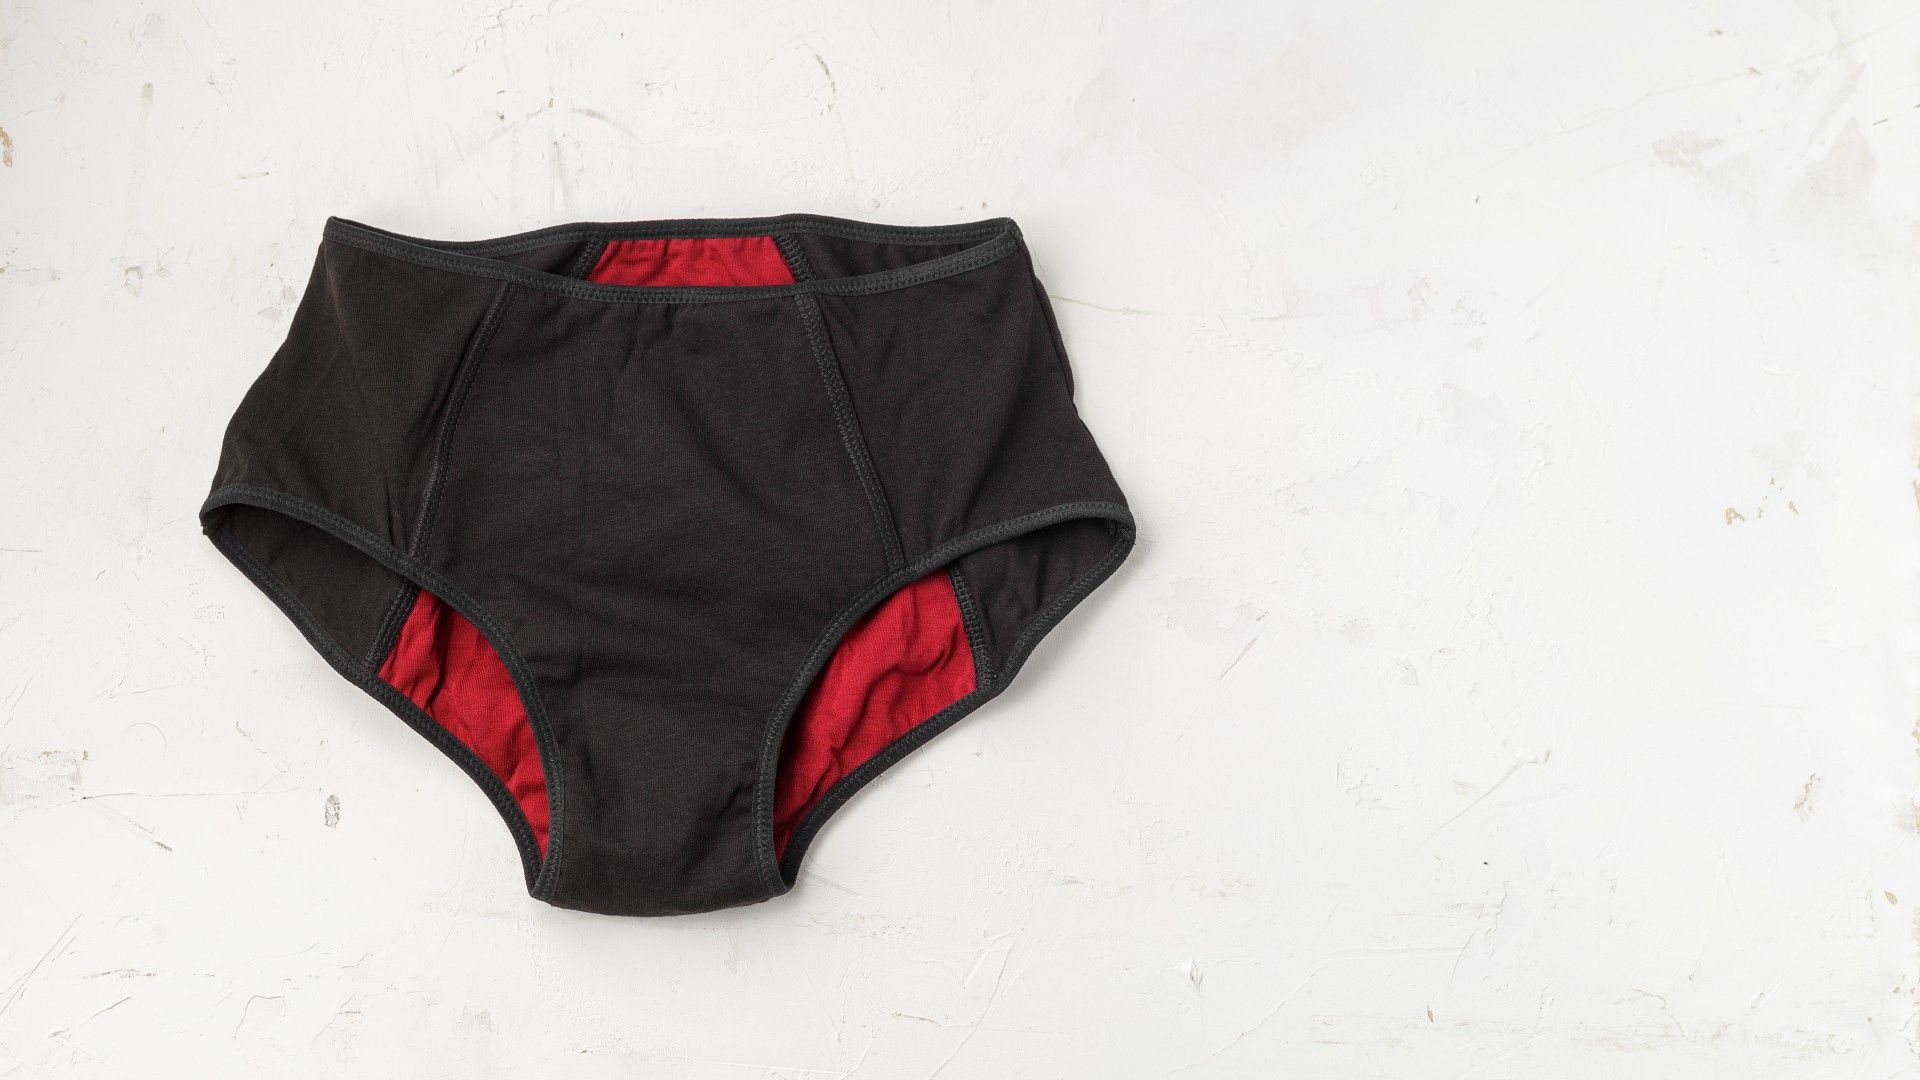 What You Need to Know About “Nontoxic” Menstrual Underwear